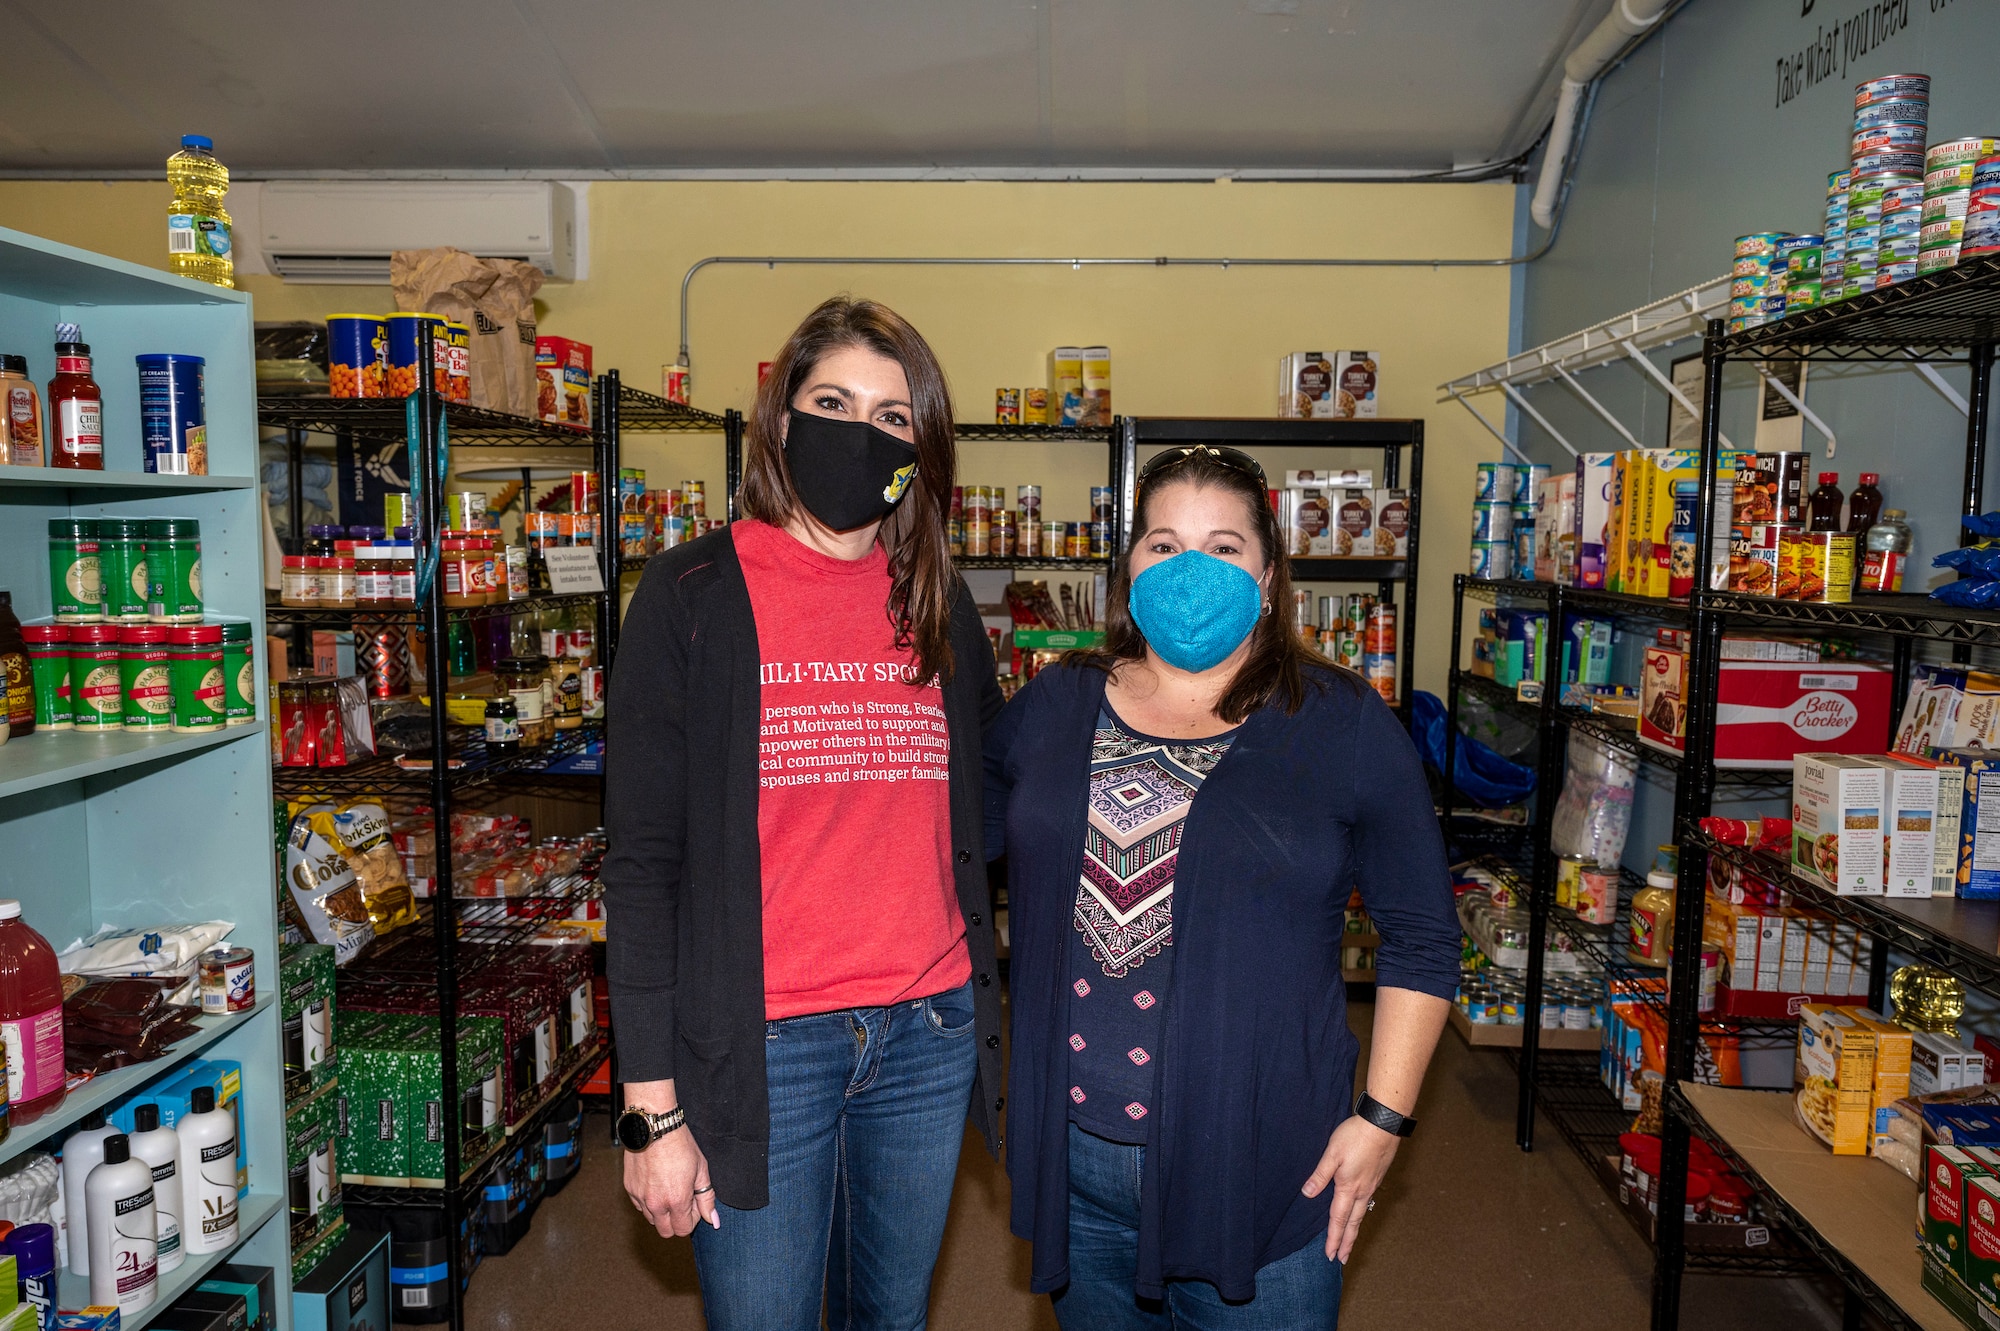 Lynne Otis, 436th Wing Staff Agency key spouse, and Jessica Hammer, 436th Aircraft Maintenance Squadron key spouse, pose for a photo in the newly established food pantry at Dover Air Force Base, Delaware, Jan. 20, 2021. Located in the Airman’s Attic, the food pantry was created by Otis and Hammer in an effort to alleviate financial burdens Airmen and their families may face during the COVID-19 pandemic. (U.S. Air Force photo by Airman 1st Class Cydney Lee)